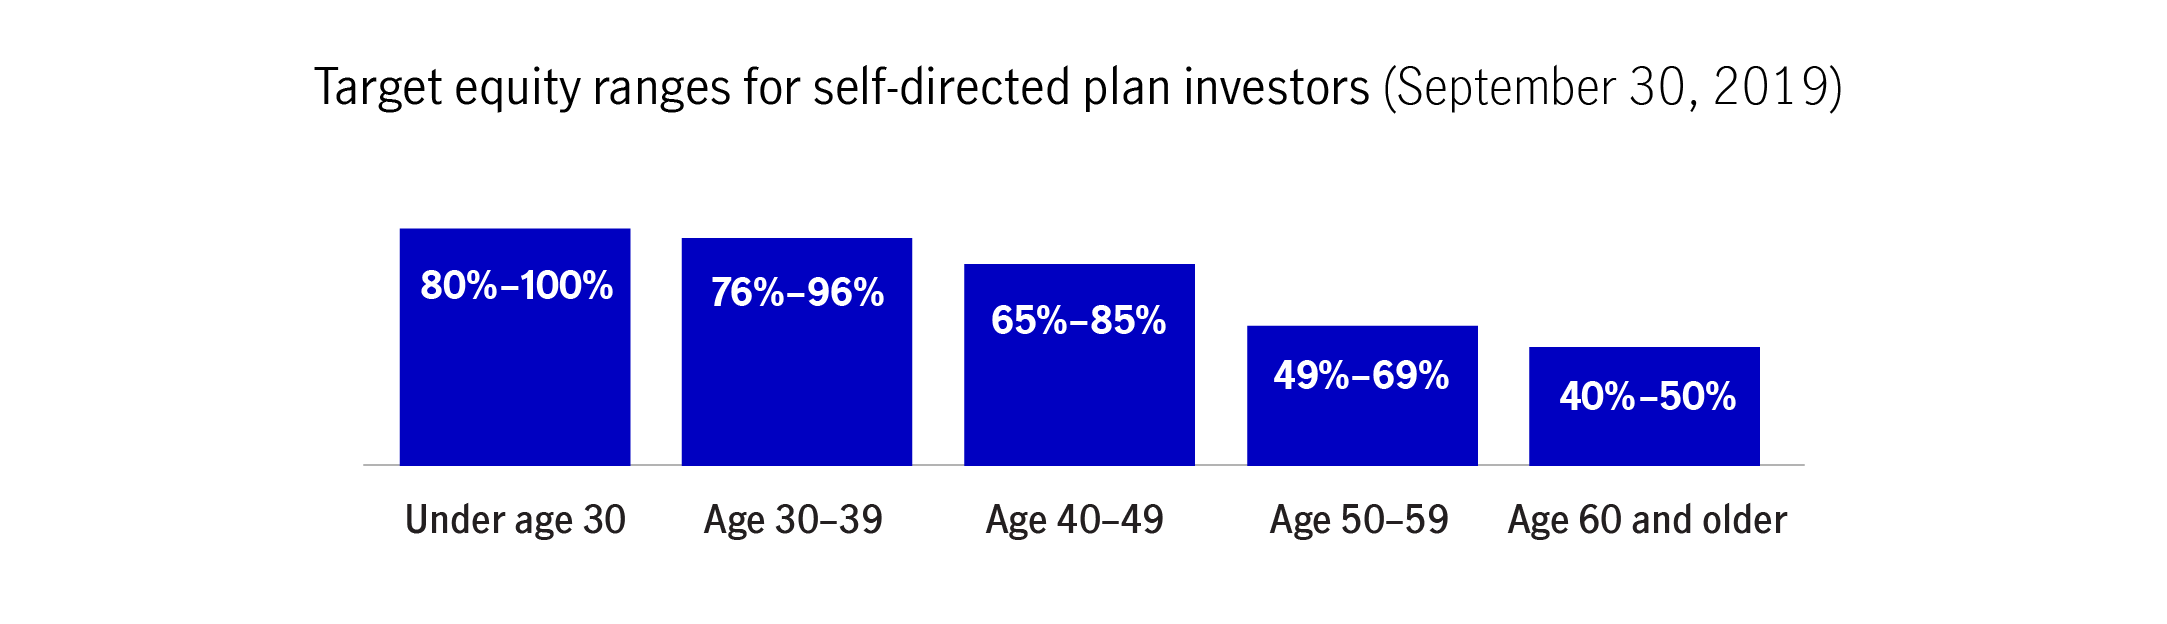 A bar chart representing target equity ranges for self-directed plan investors as of September 30, 2019. The percentage ranges start at 80 to 100 percent for participants up to age 30. They then scale downward, reaching 40 to 50% for those age 60 and older.